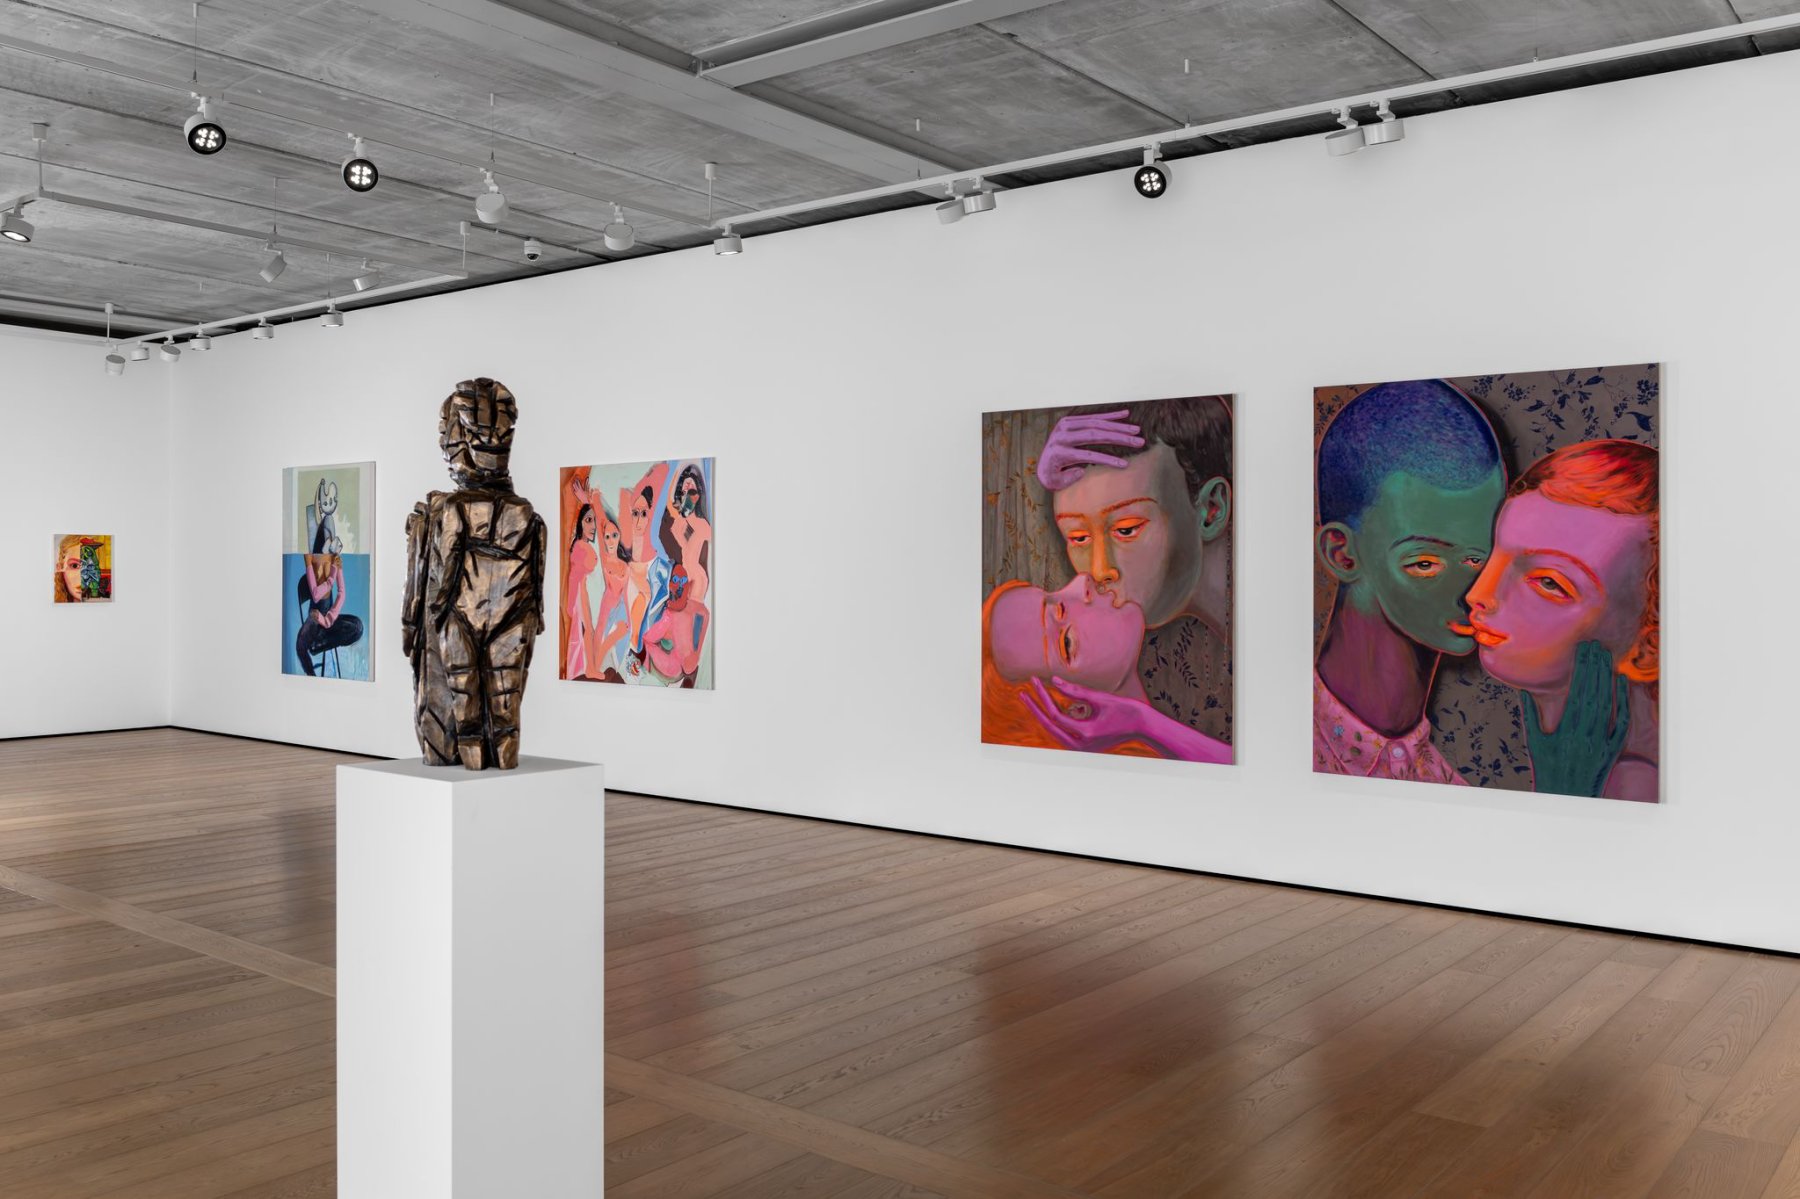 Installation image for Celebrating Picasso Today: Infinite Modernism, at Almine Rech